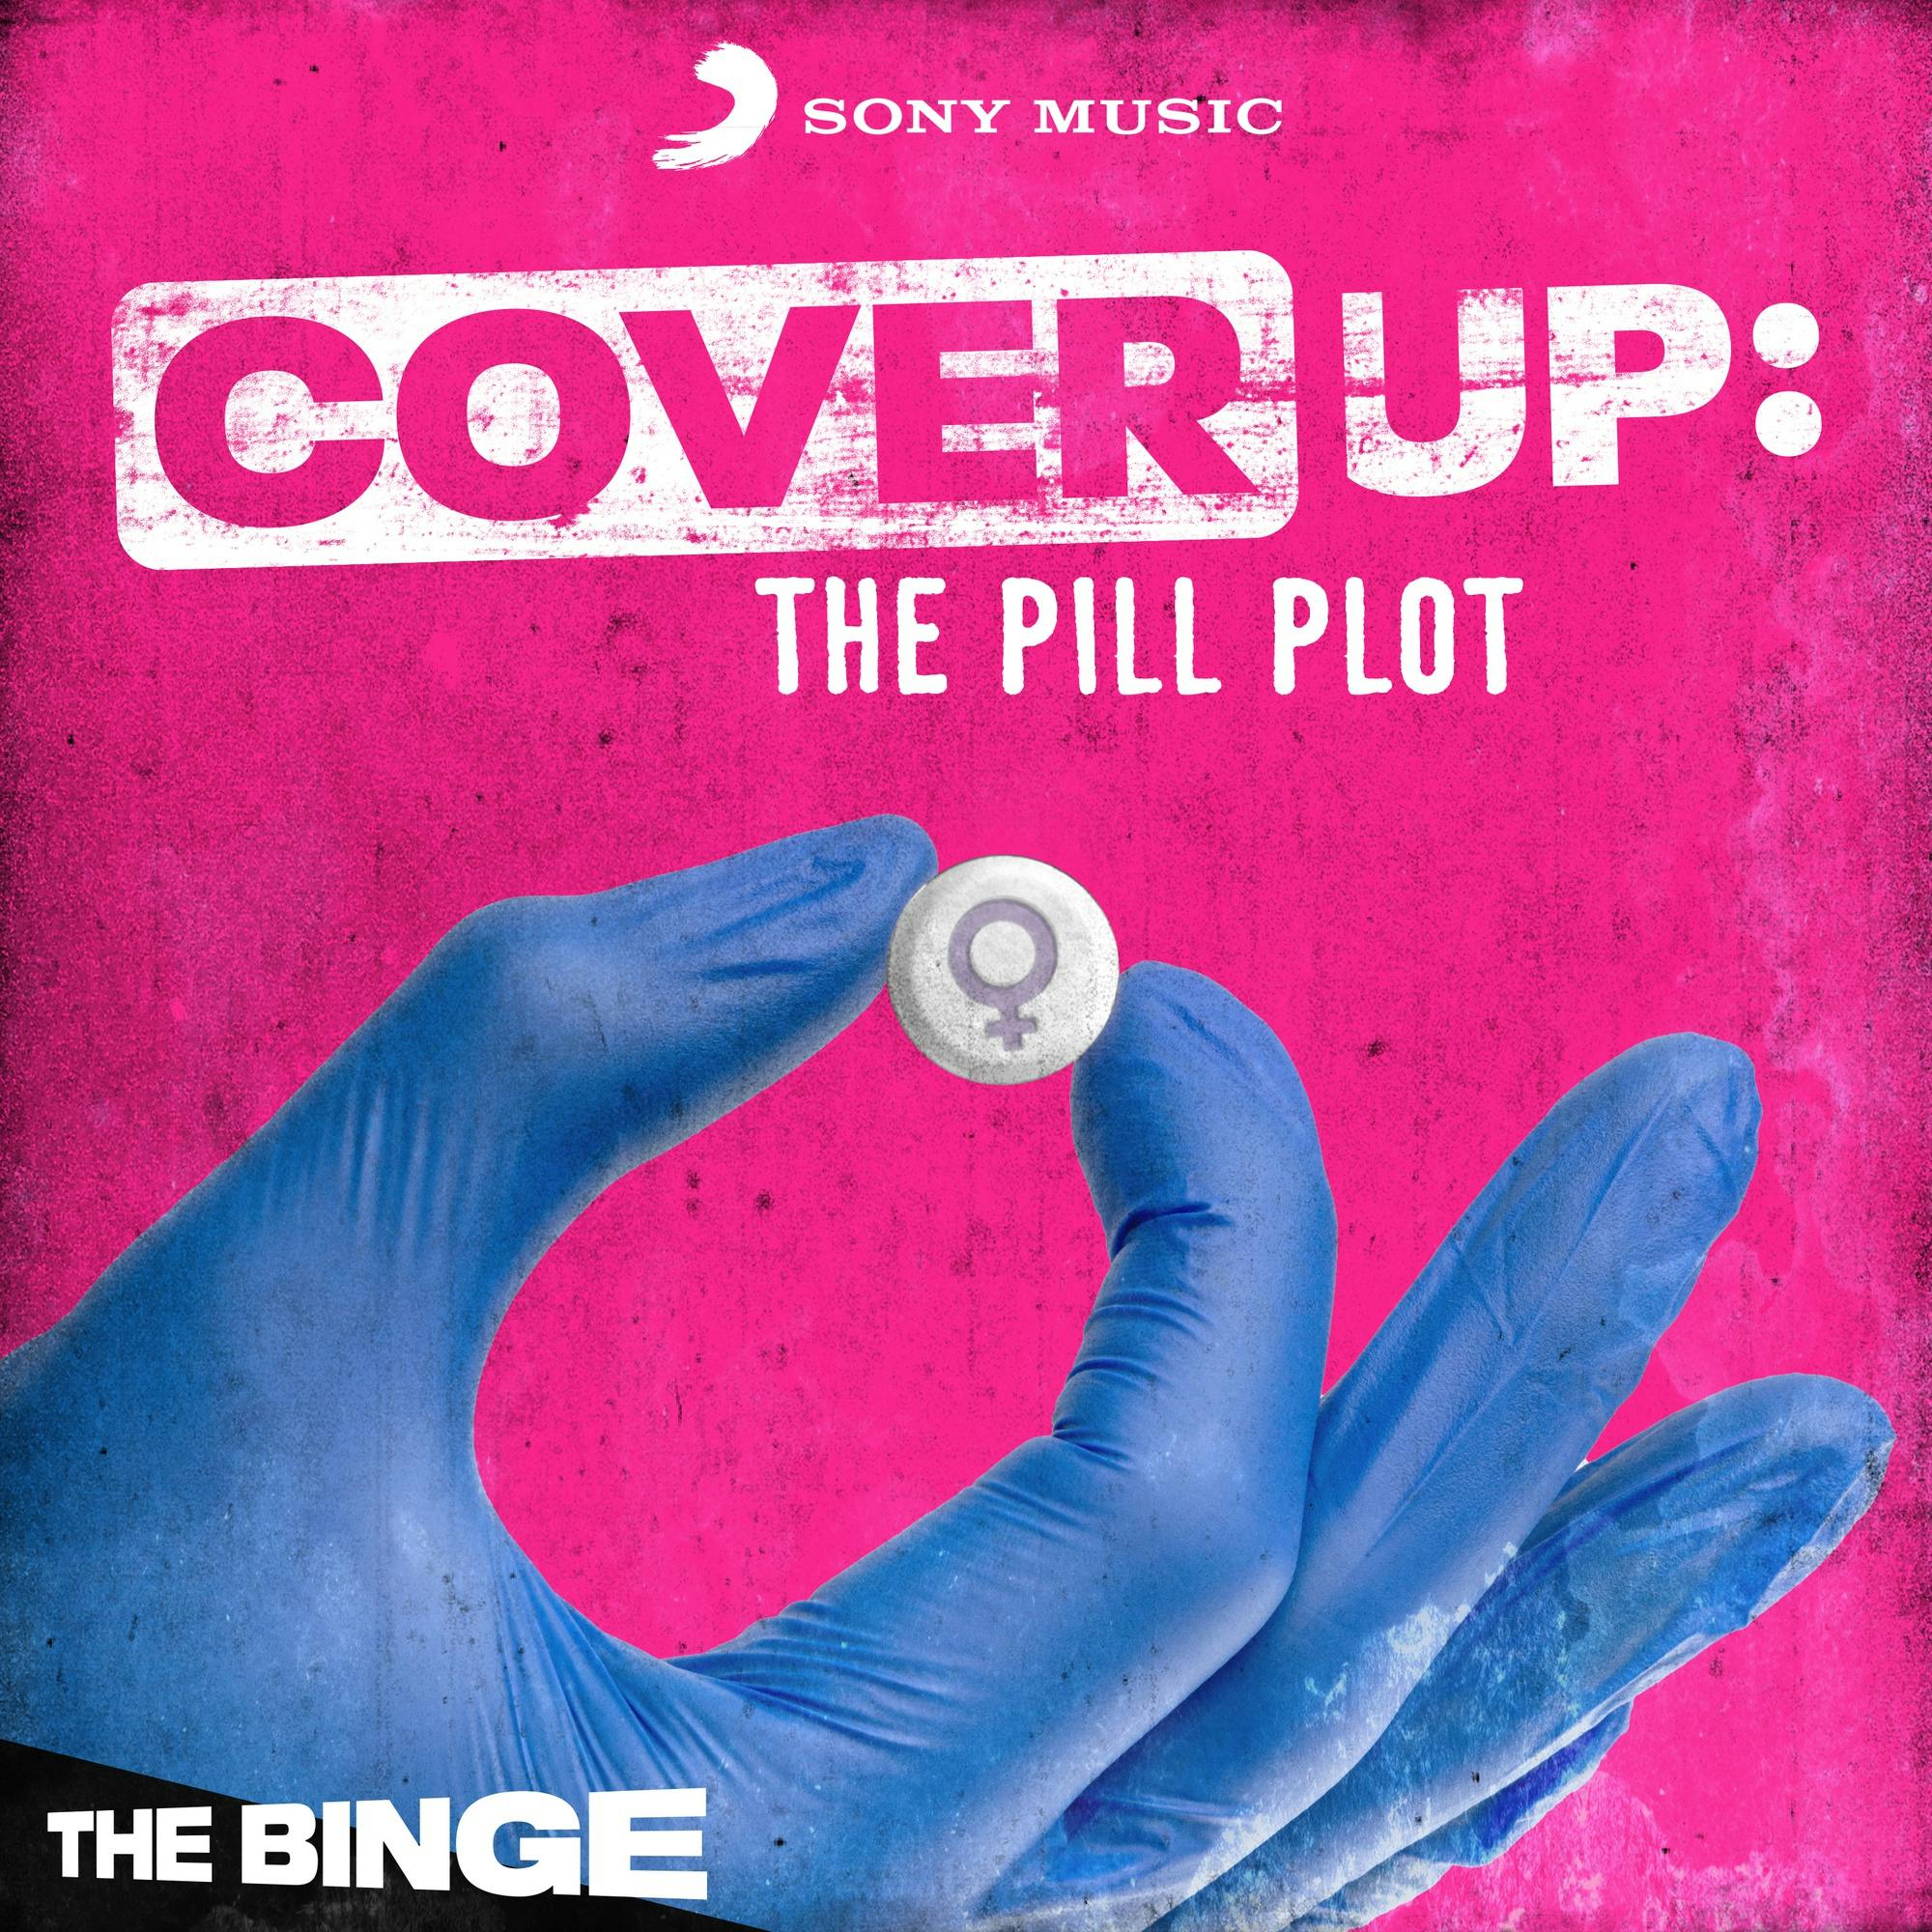 From the Host of BioHacked... Cover Up: The Pill Plot